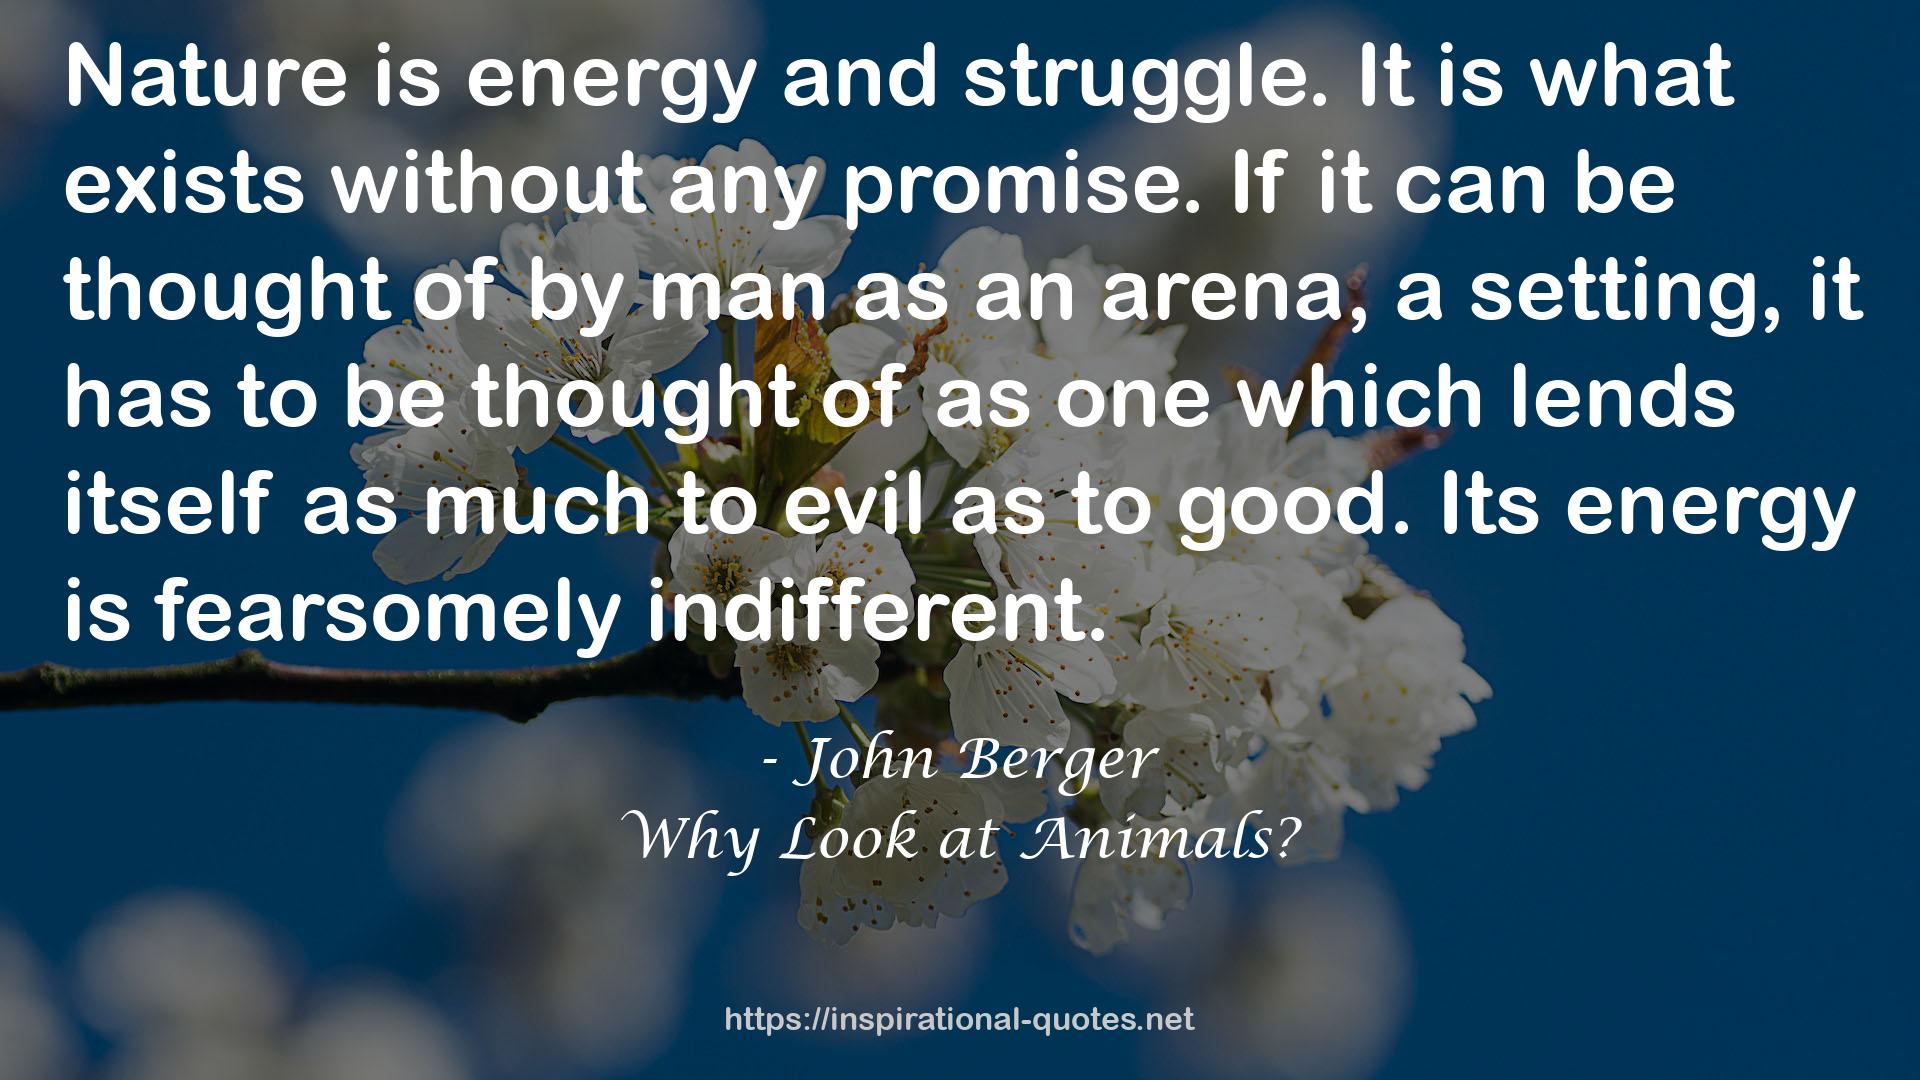 Why Look at Animals? QUOTES